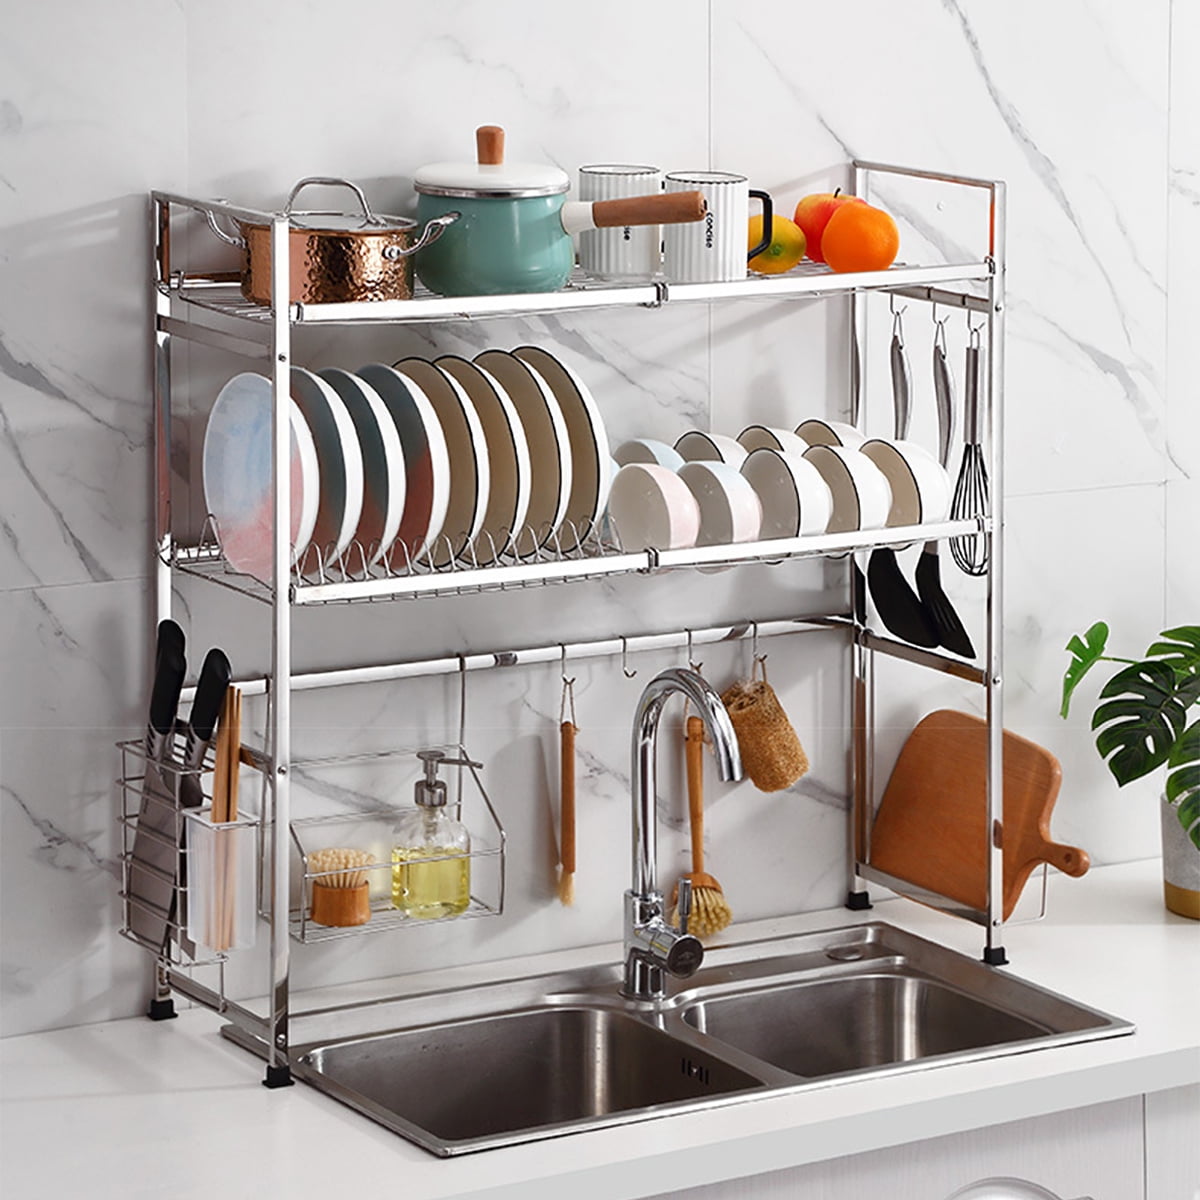 Details about   2 Tier Stainless Steel Dish Rack Over Sink Bowl Shelf Organizer Cutlery Holder 